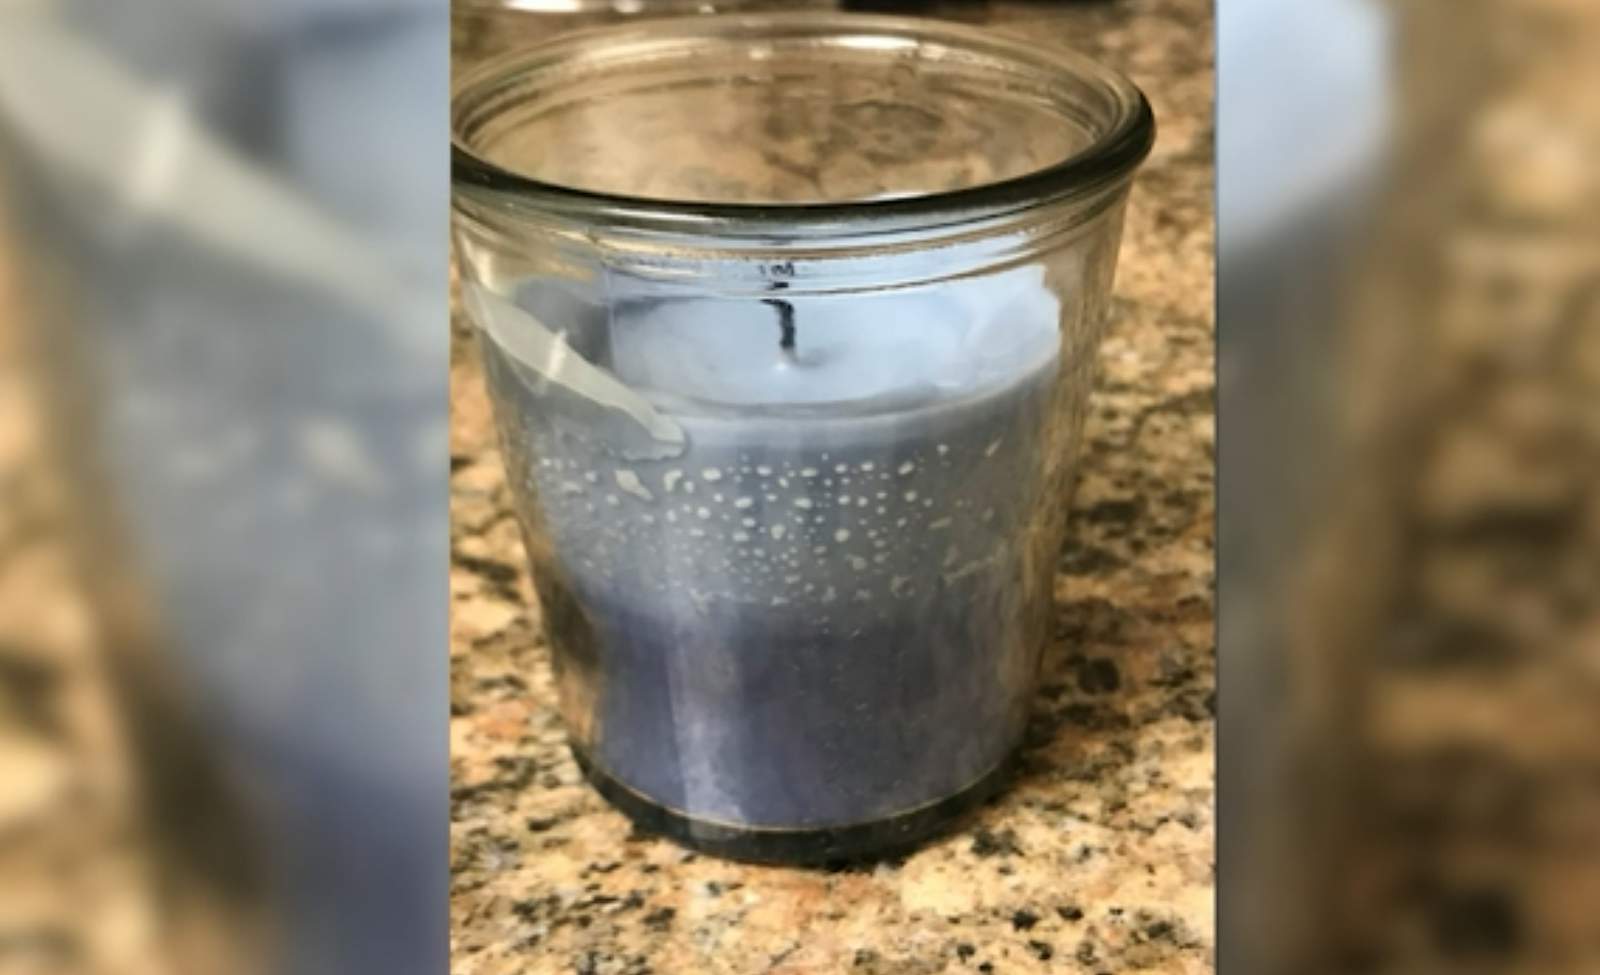 Over 140,000 candles sold at Dollar Tree recalled for fire hazard